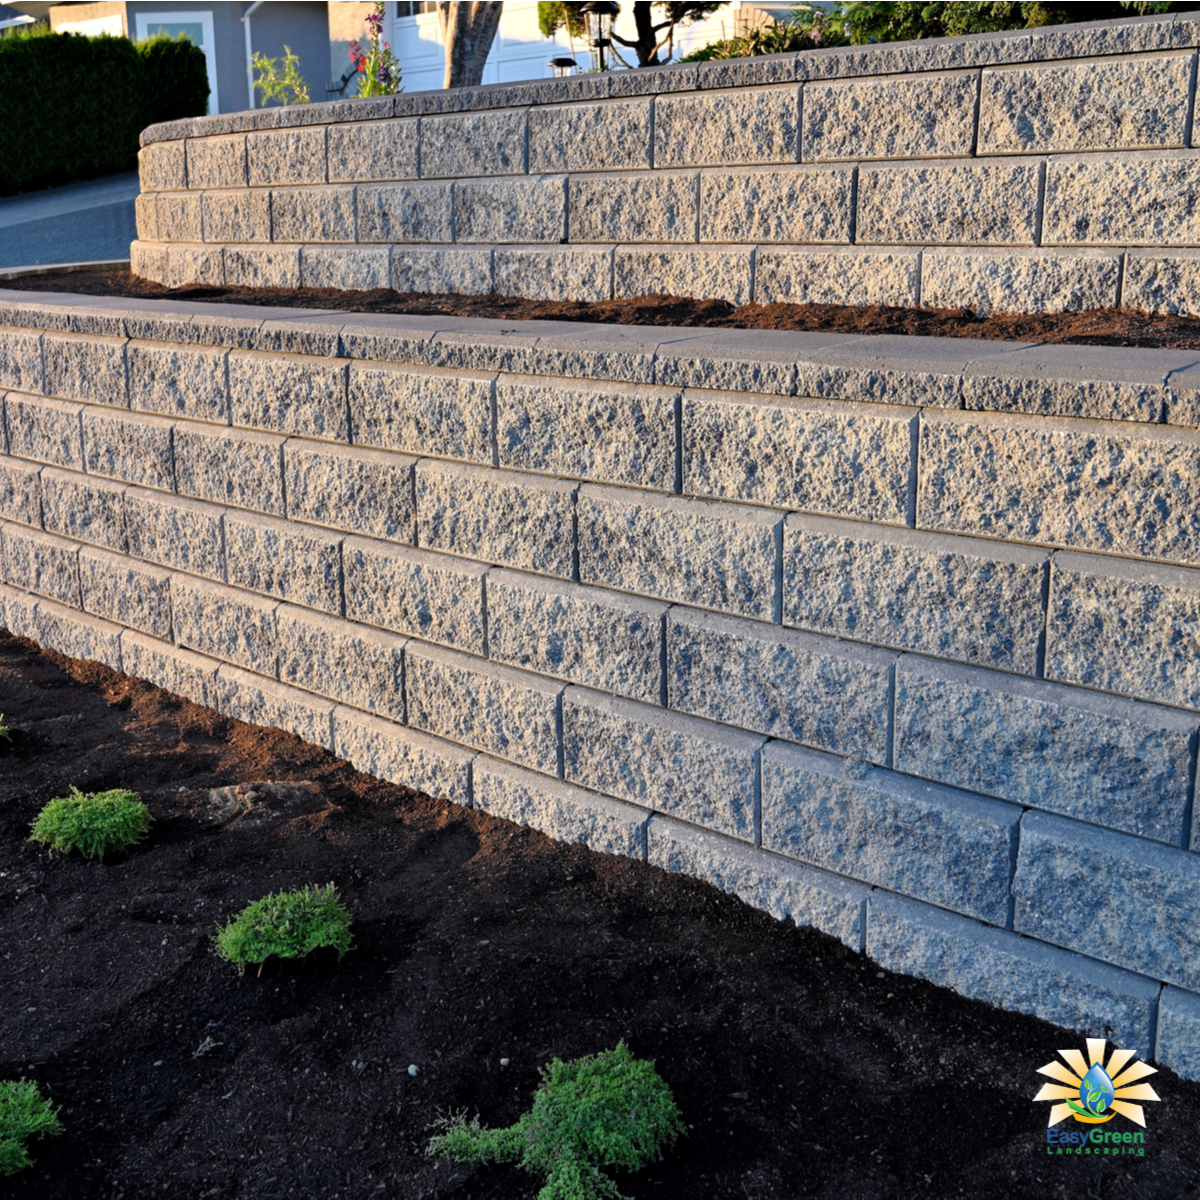 Contact Us When You Need Retaining Wall Installation Services In Monroe